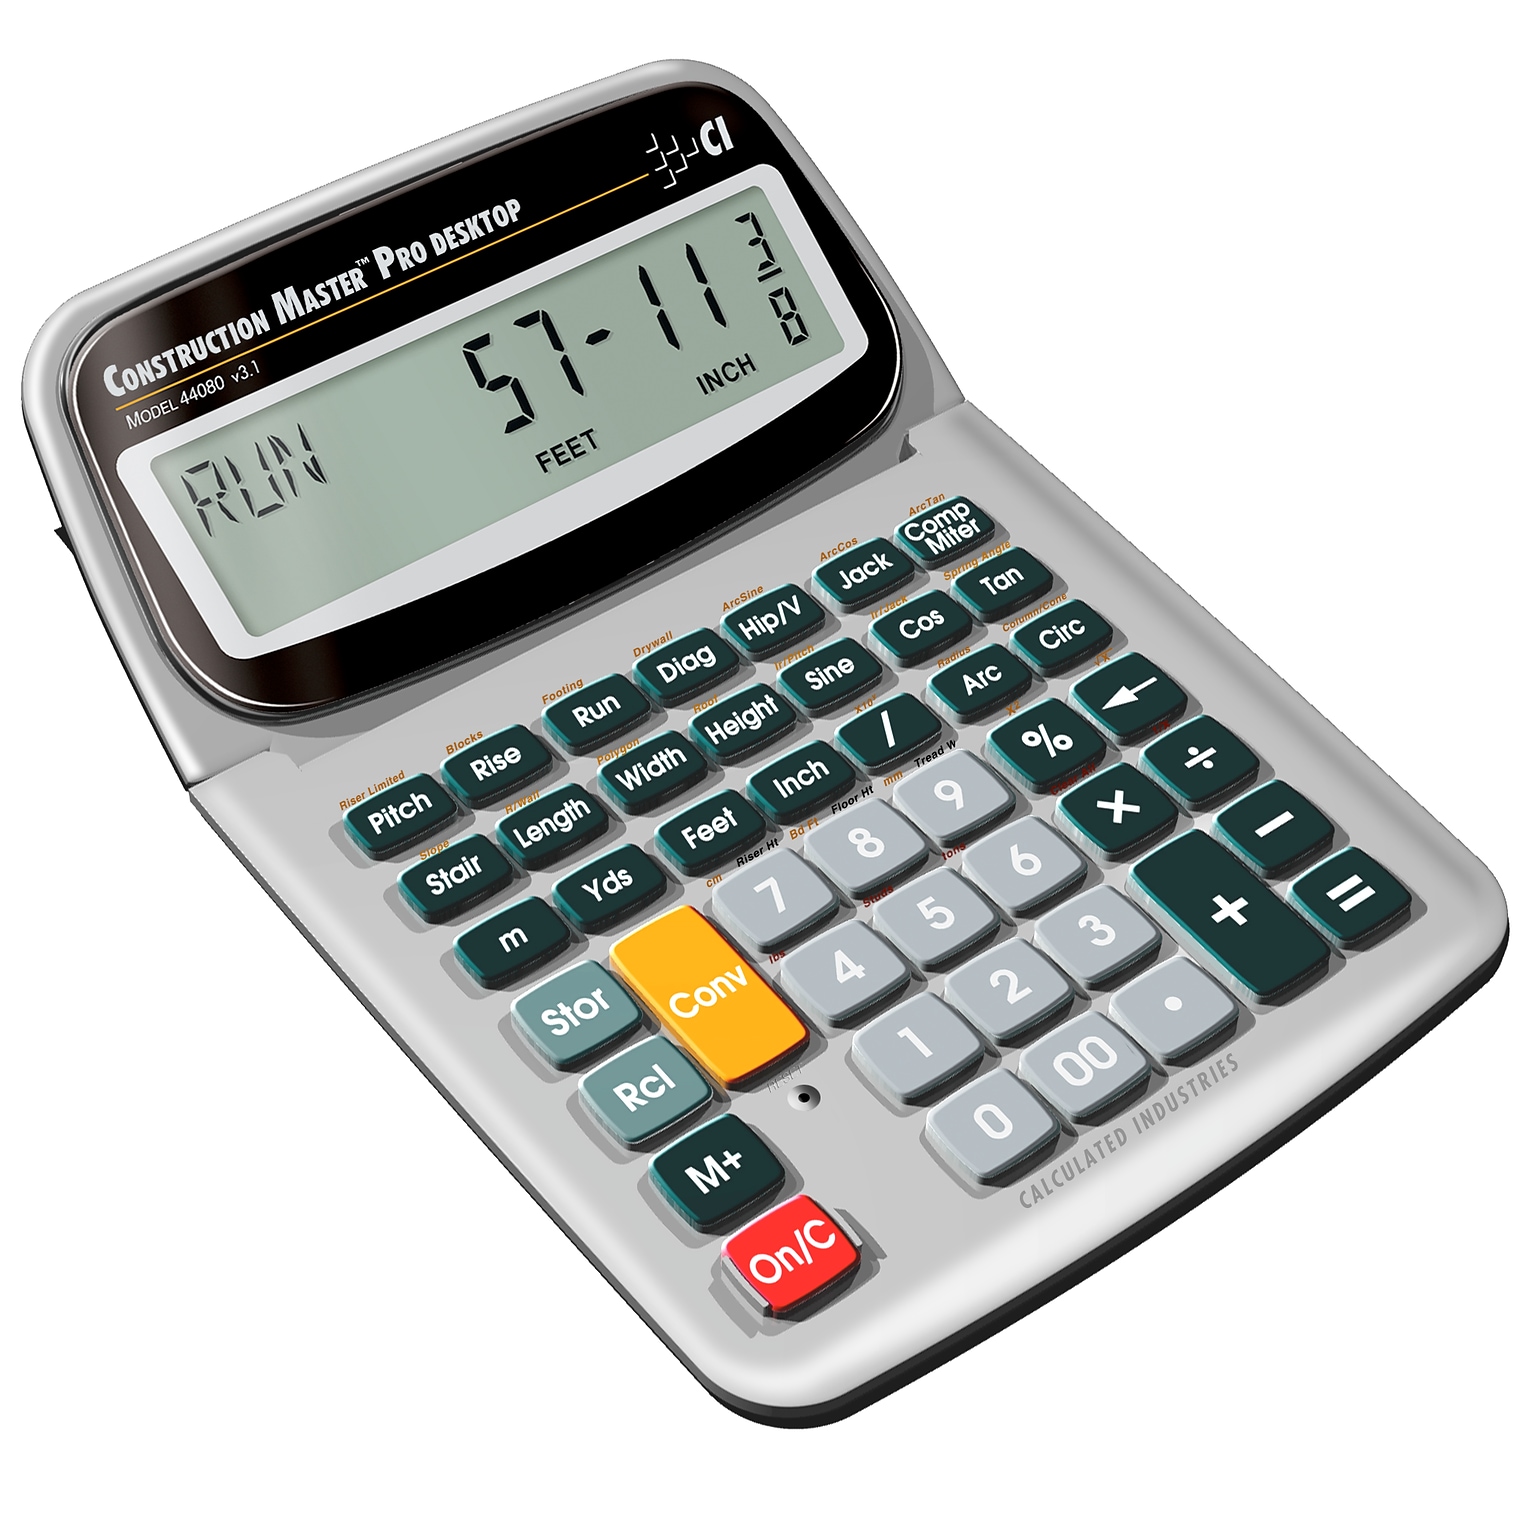 Calculated Industries Construction Master 44080 11-digit Construction Calculator, Silver/Black